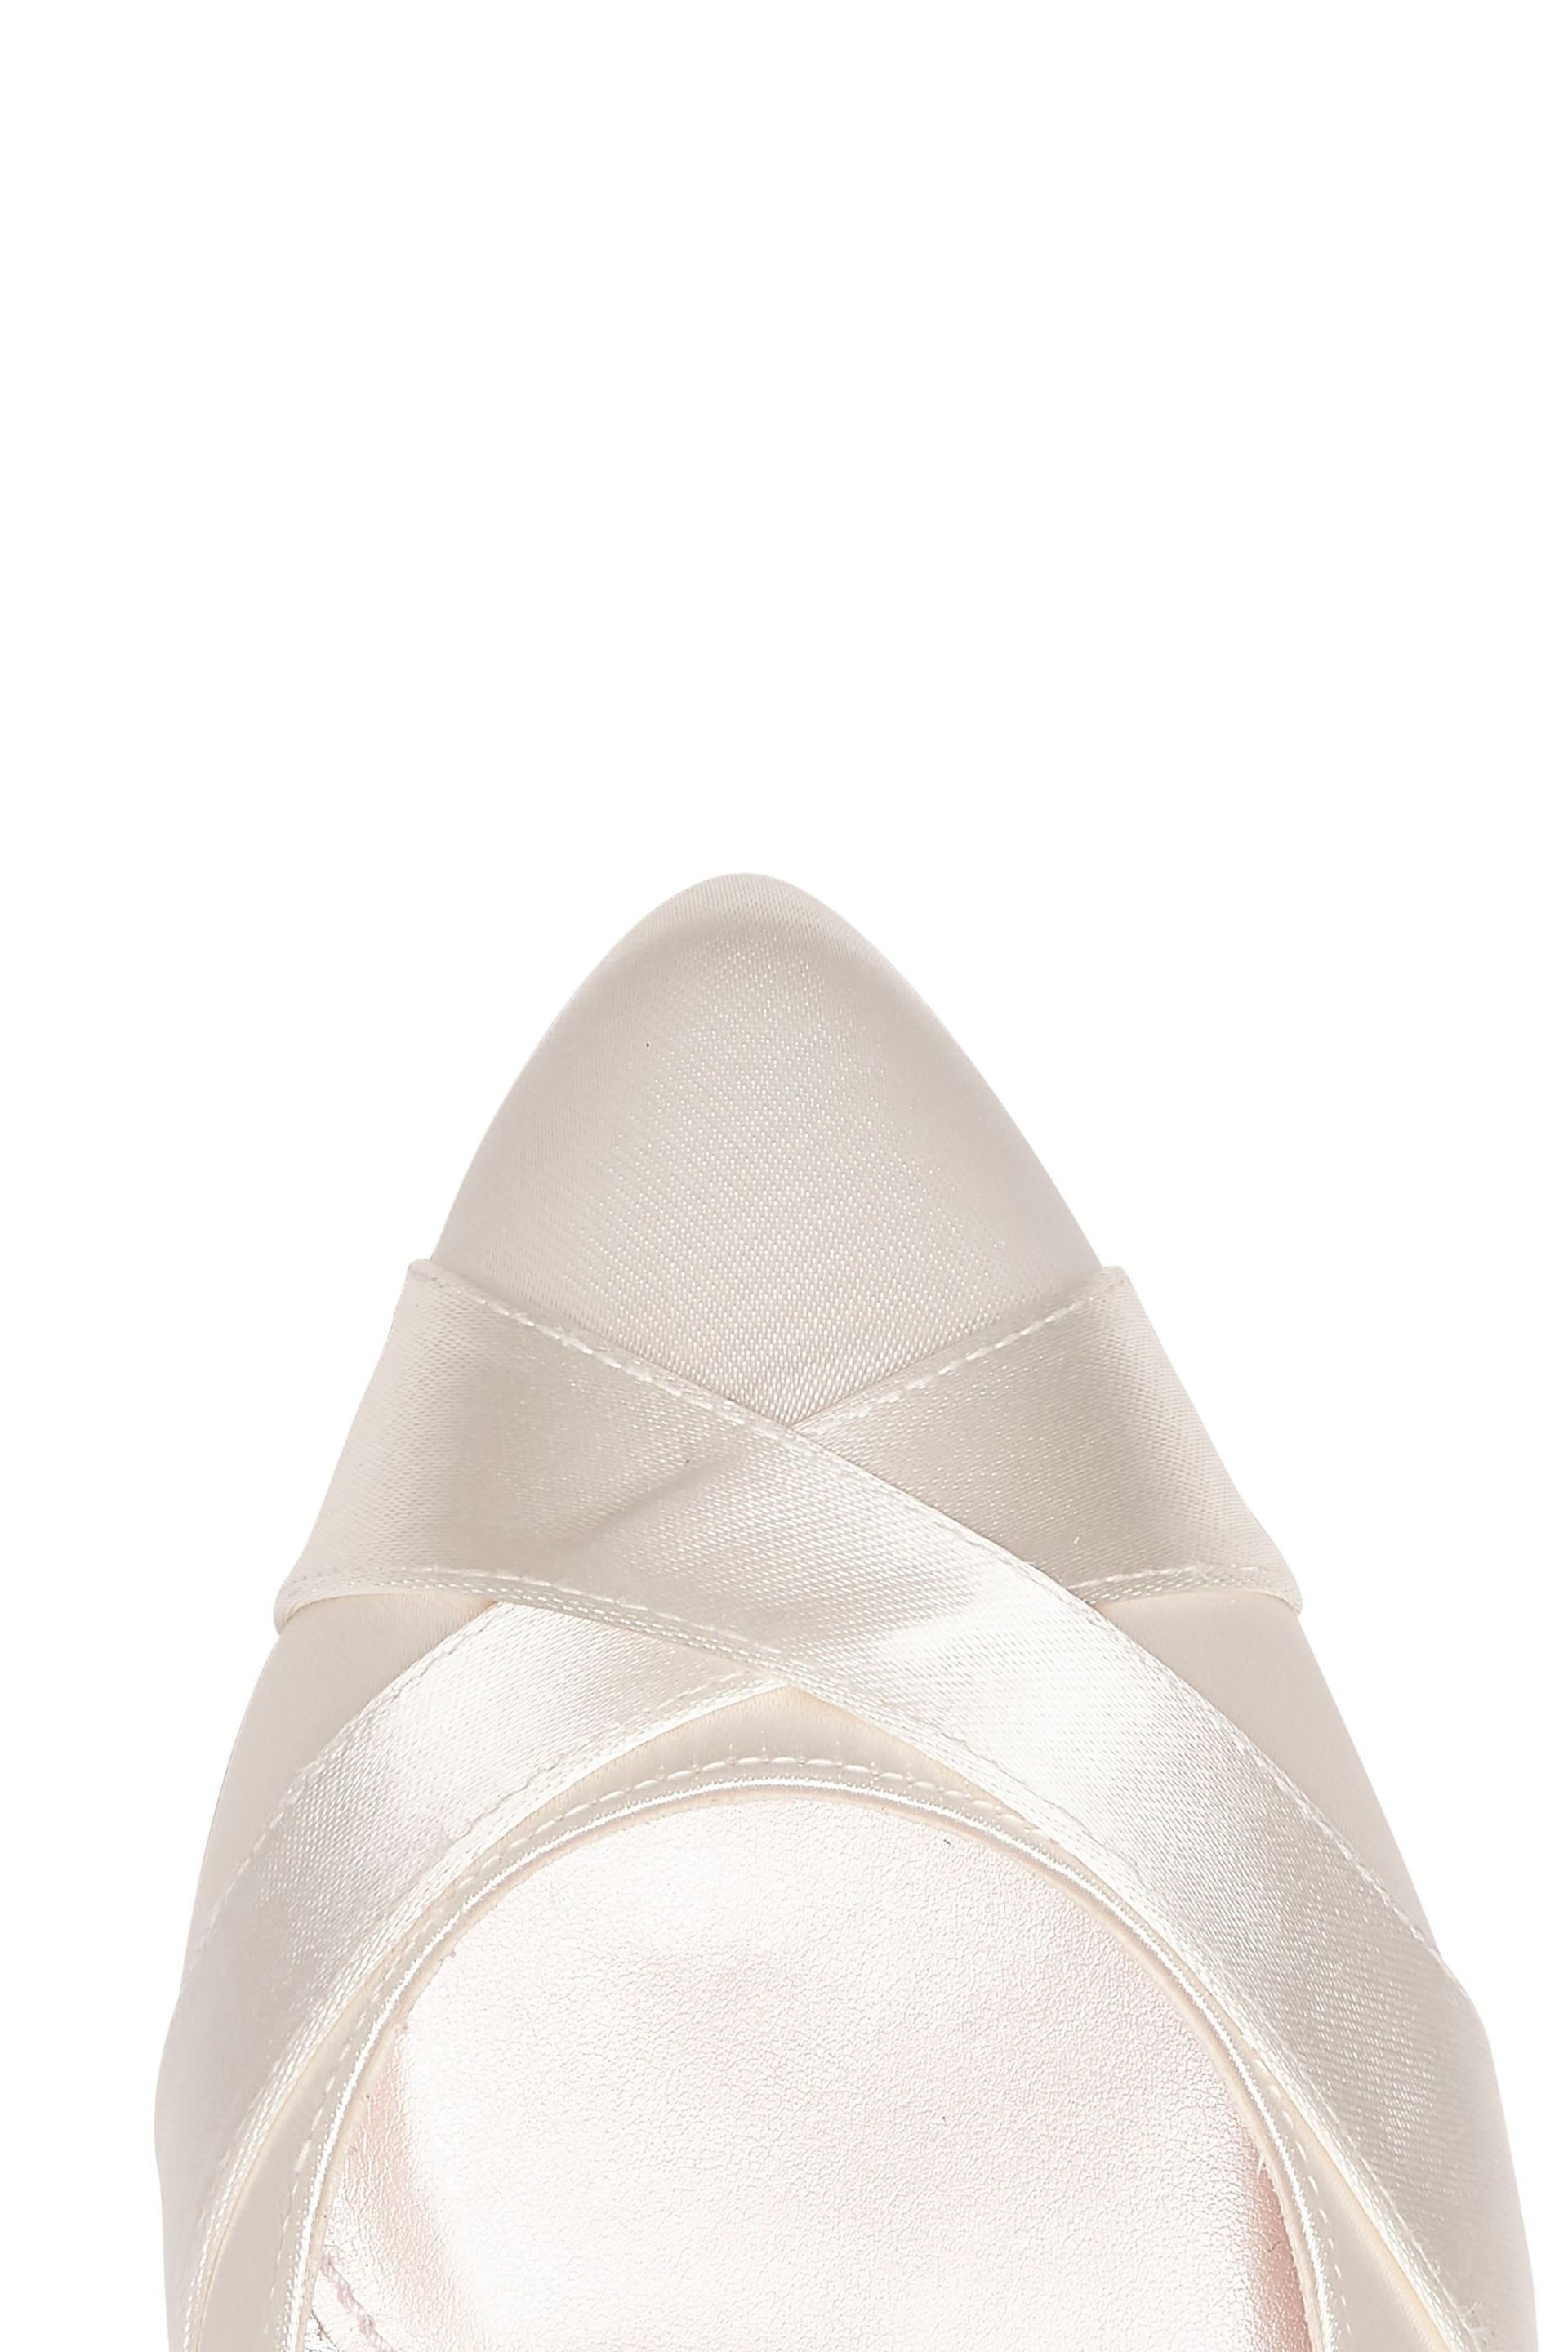 Rainbow Club Cream Bridal Lexi Wide Fit Satin Wedding Court Shoes - Image 4 of 4